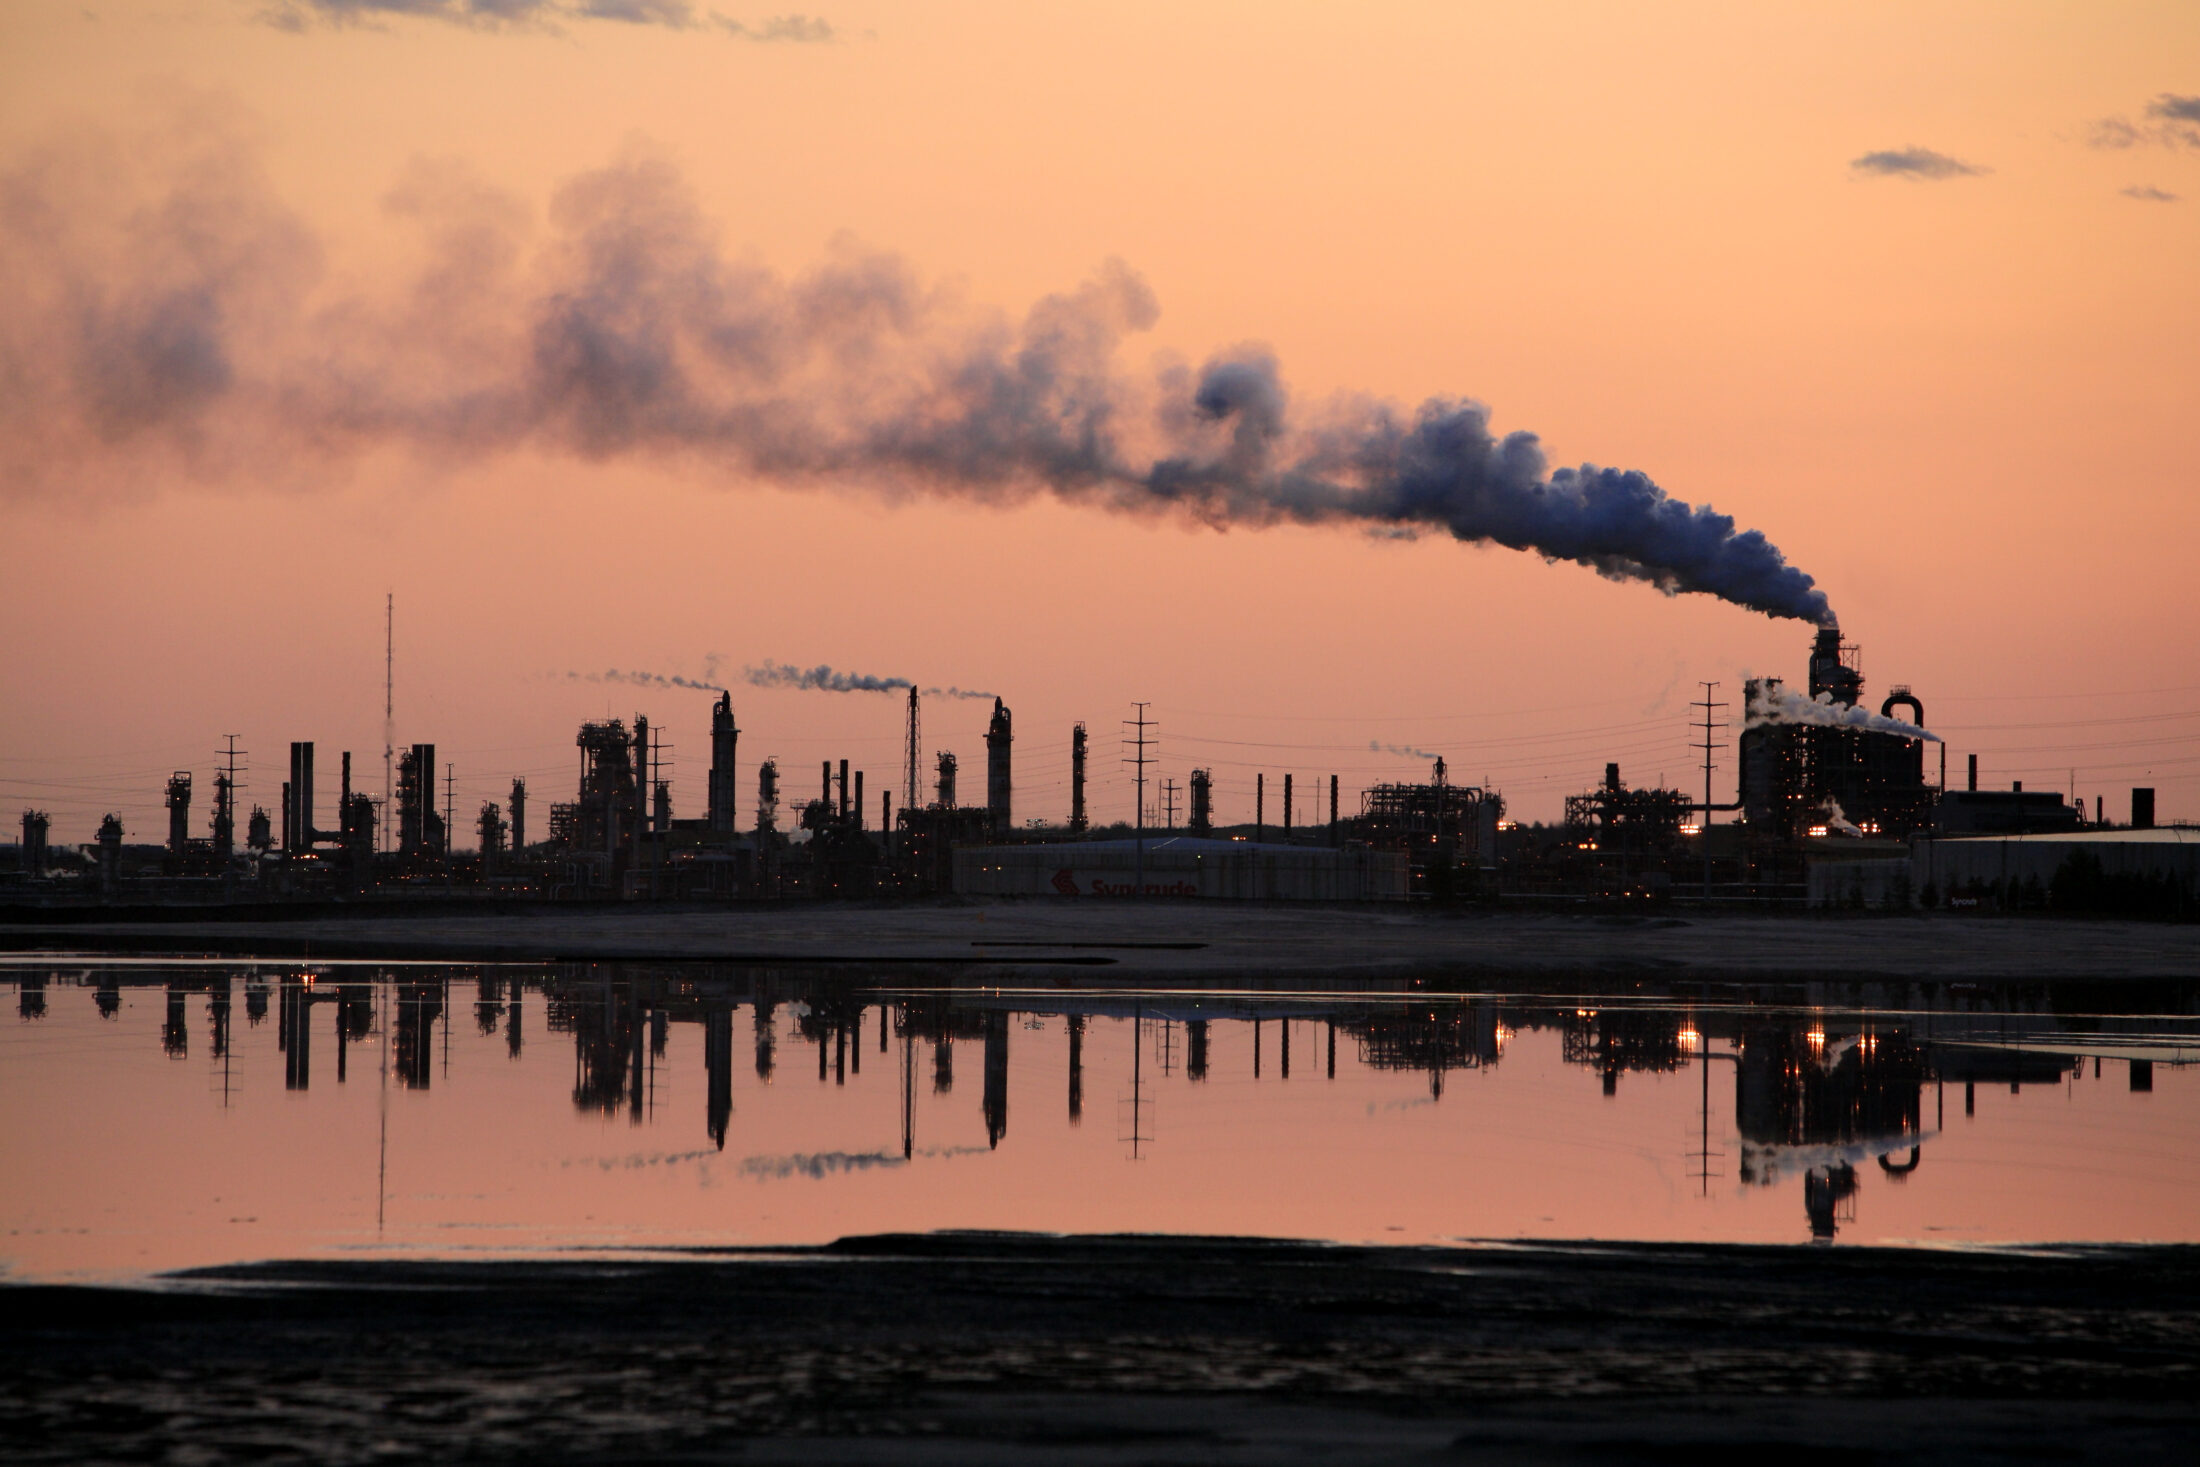 silhouette of Syncrude plant against orange sky, reflected in water of tailings pond